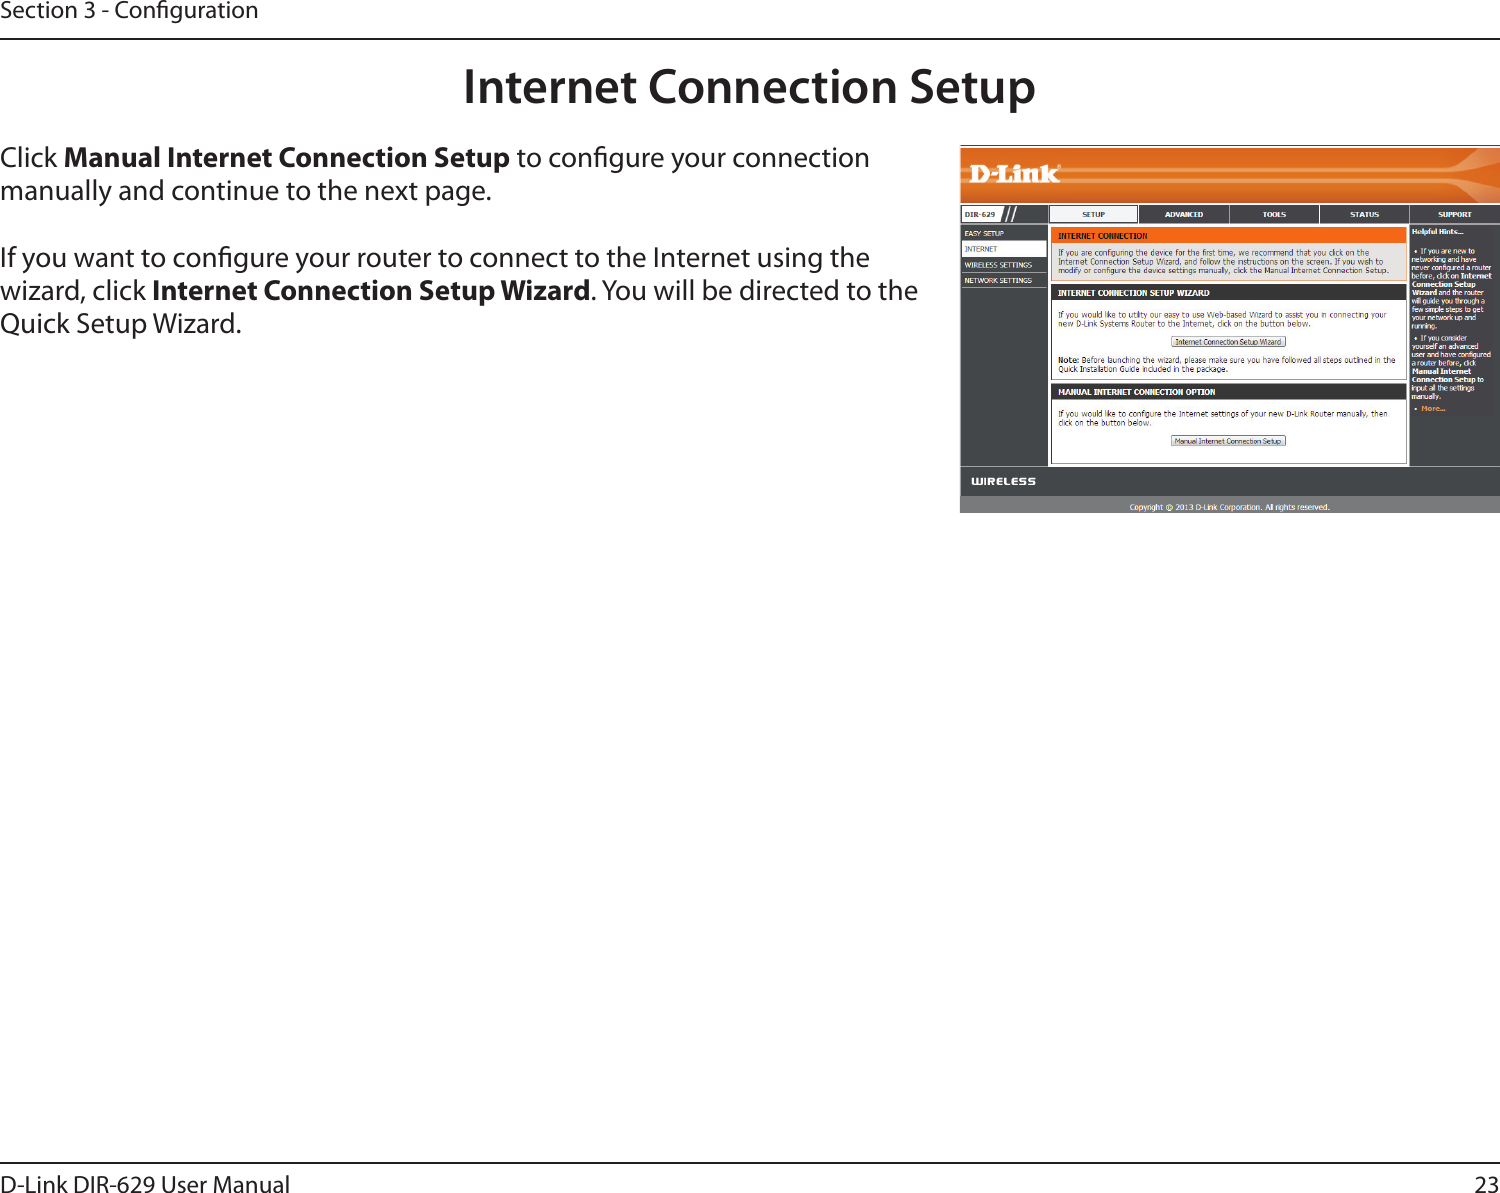 23D-Link DIR-629 User ManualSection 3 - CongurationInternet Connection SetupClick Manual Internet Connection Setup to congure your connection manually and continue to the next page.If you want to congure your router to connect to the Internet using the wizard, click Quick Setup Wizard. 